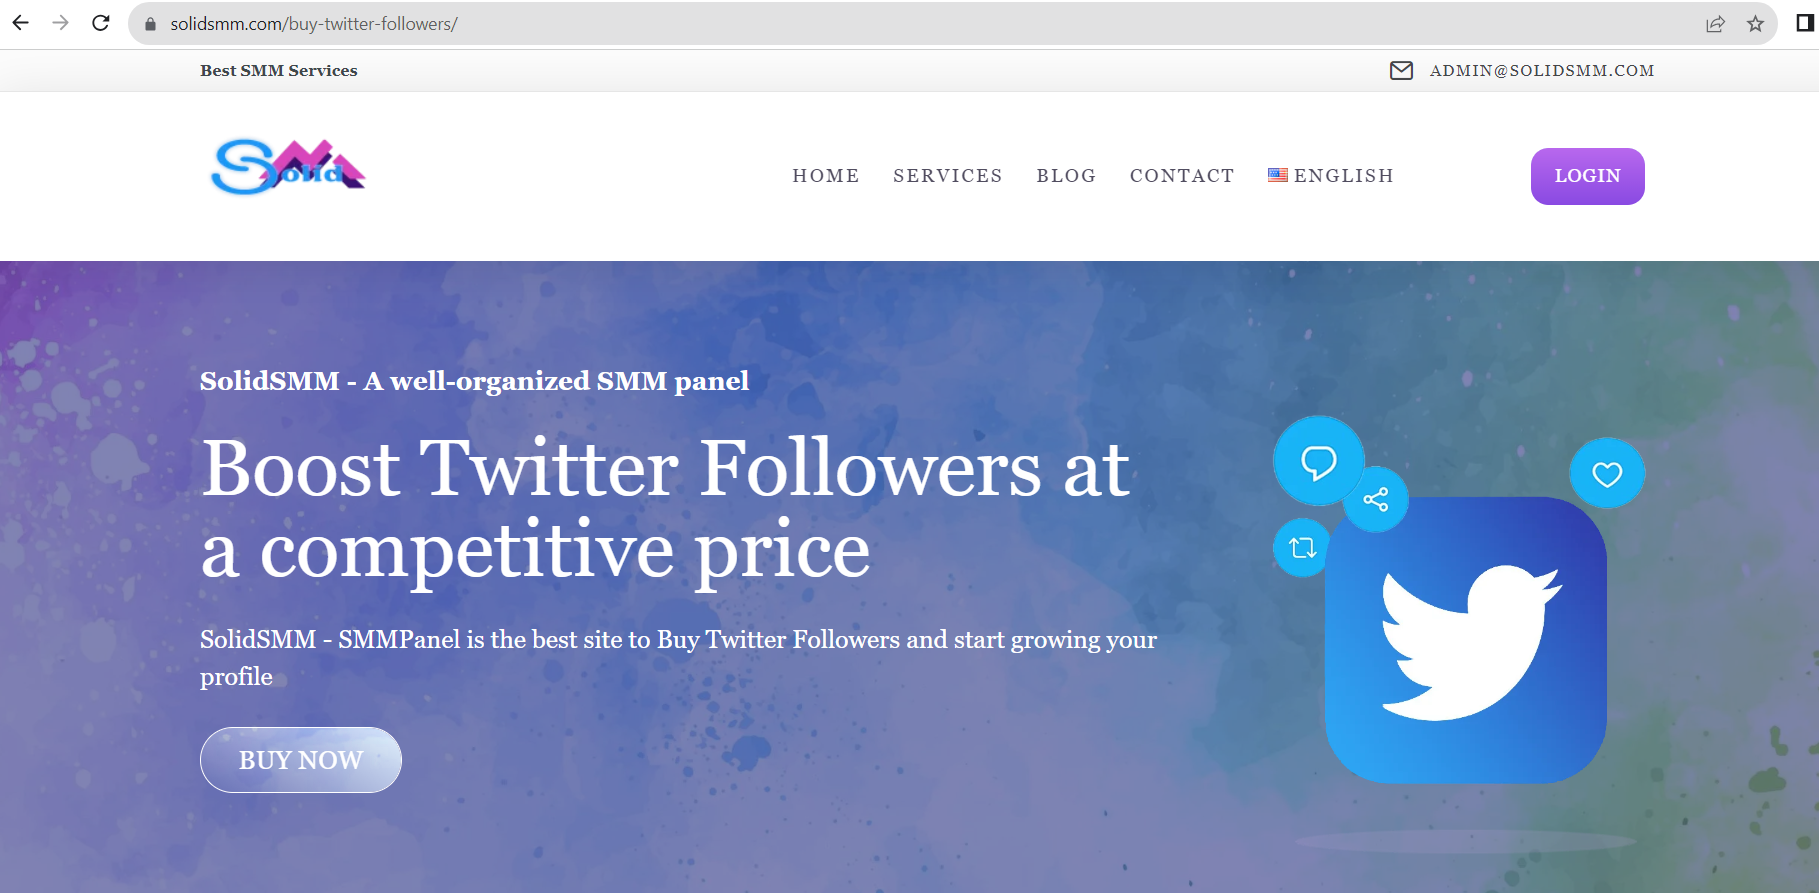 Best place to buy Twitter followers